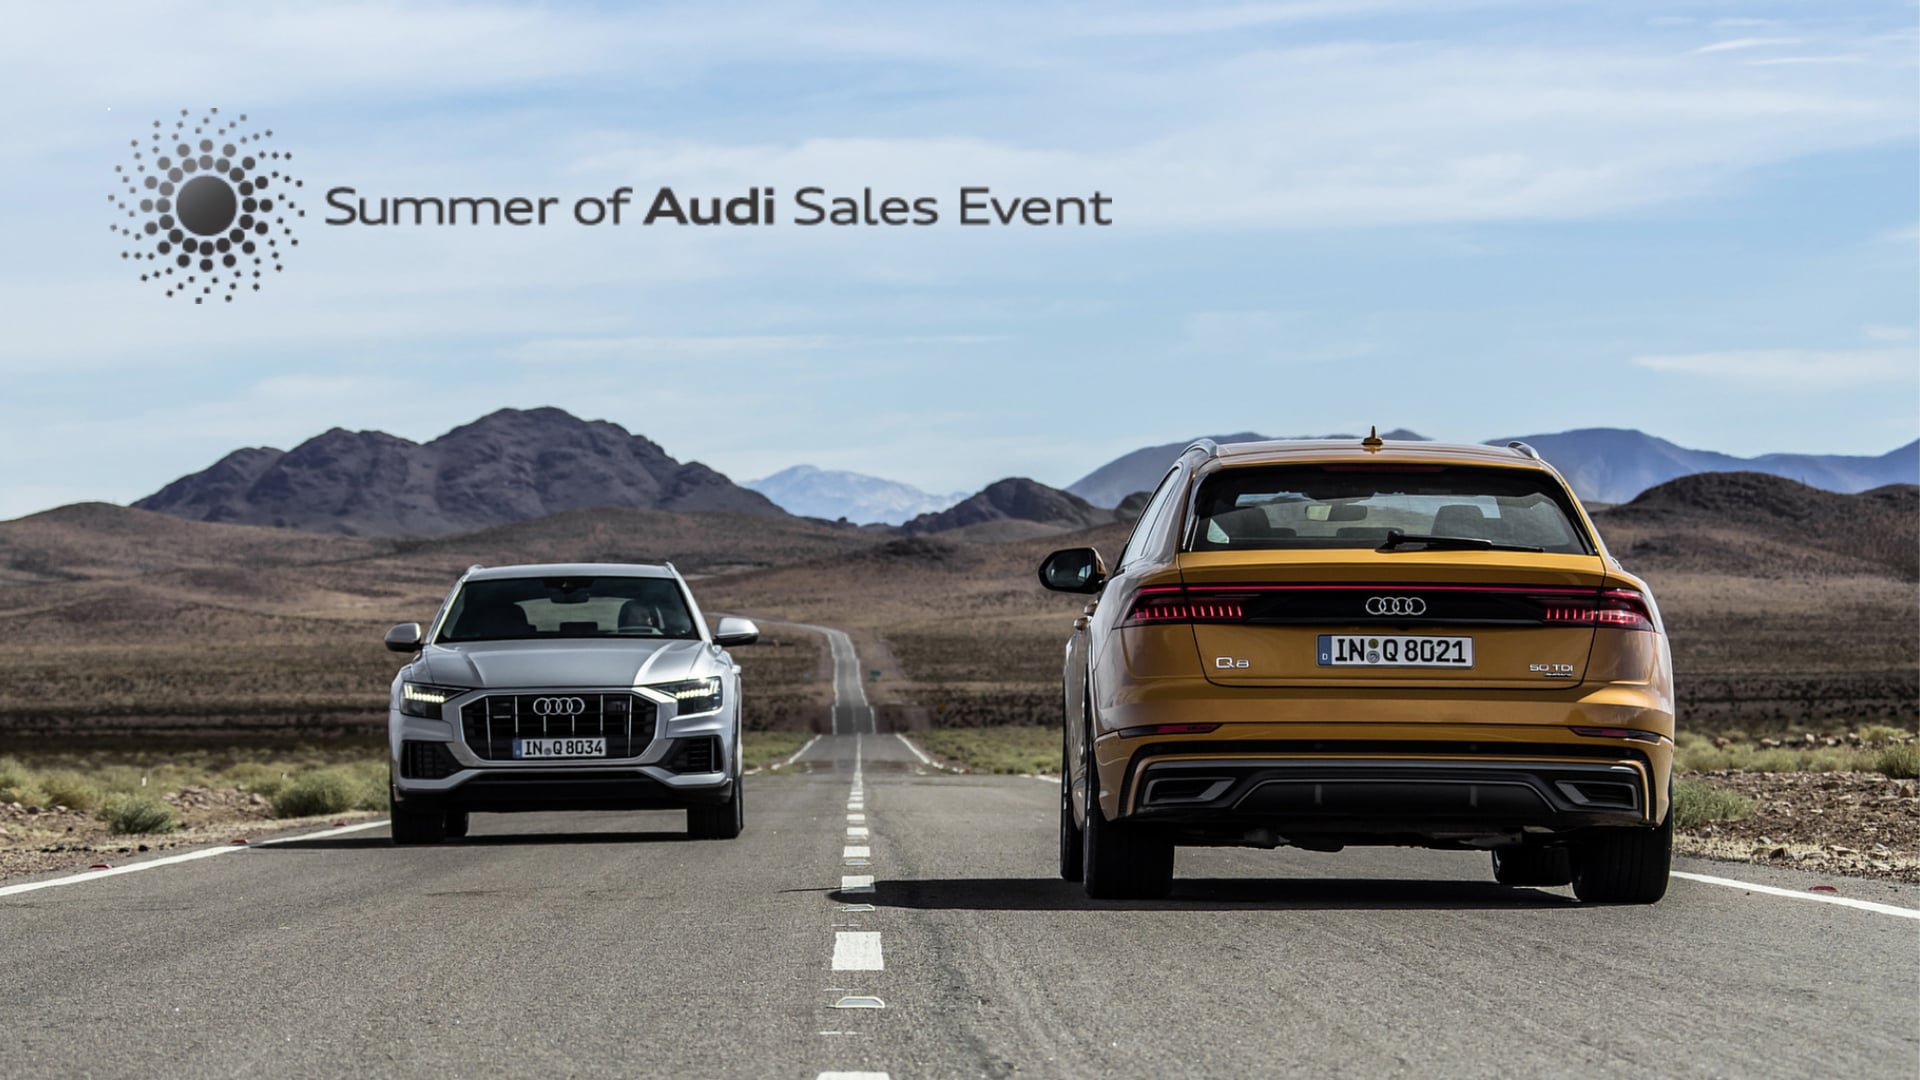 Summer of Audi Sales Event at Town Audi Audi Englewood